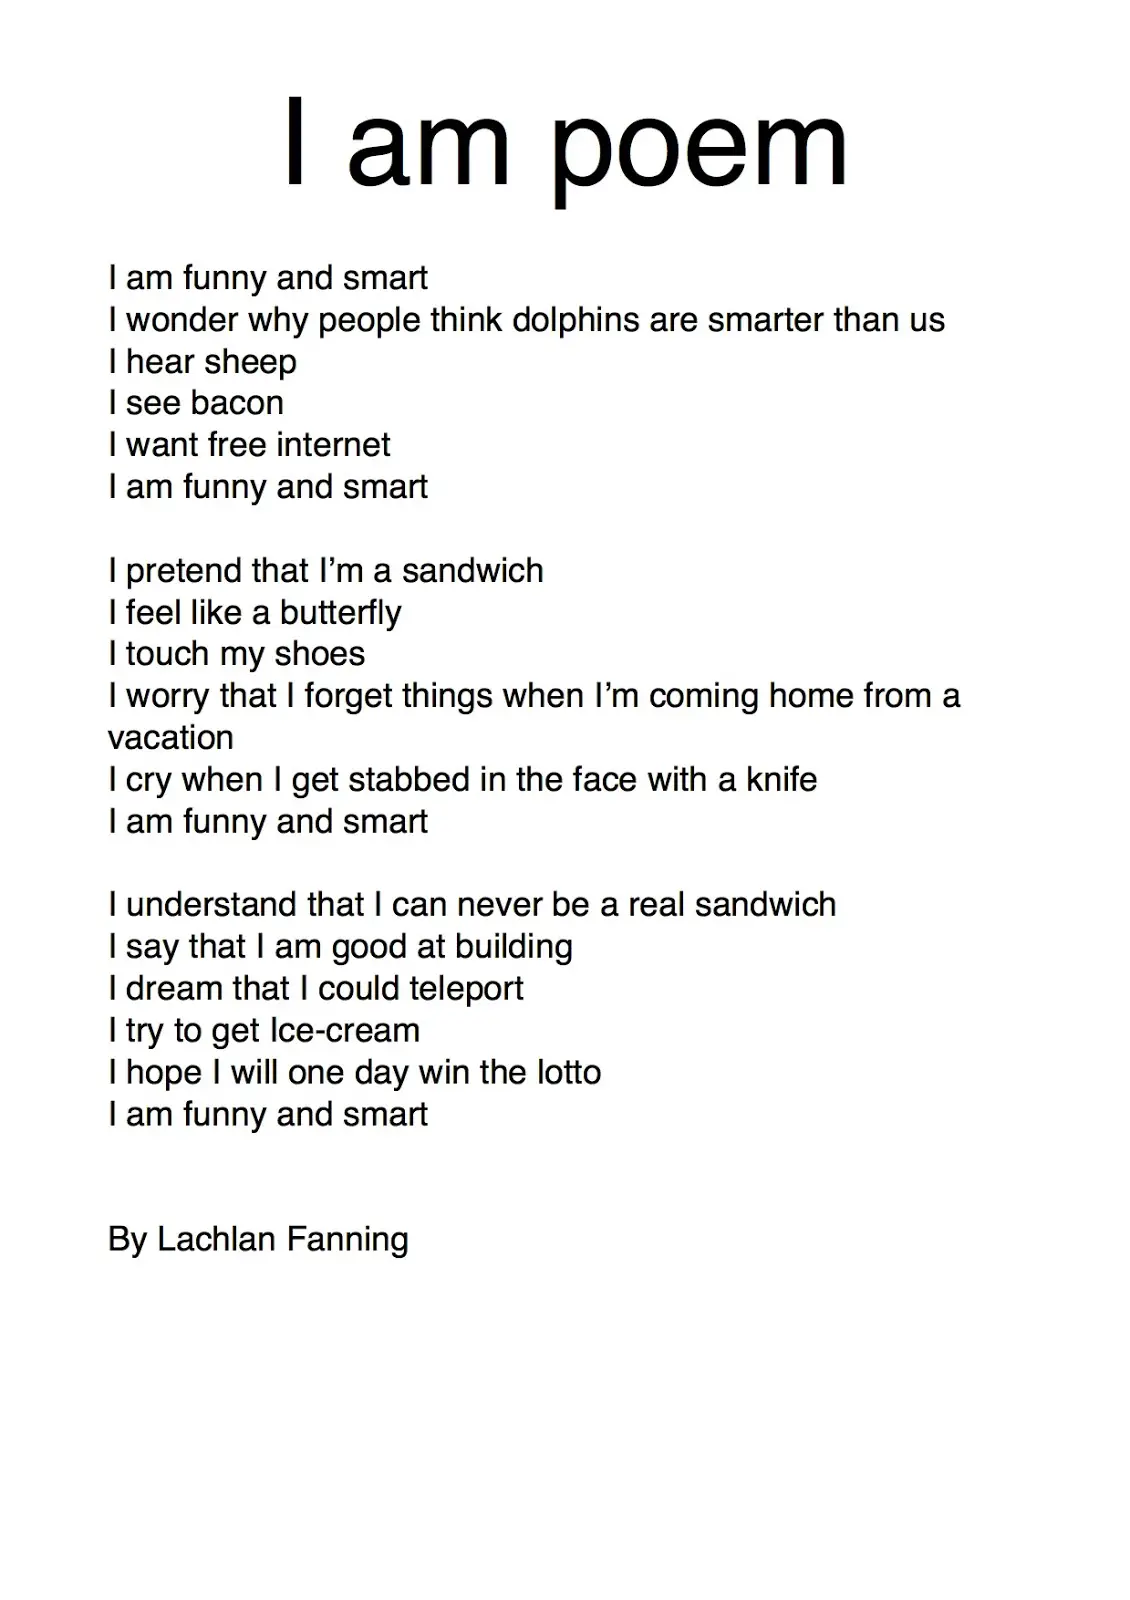 examples of i am poems